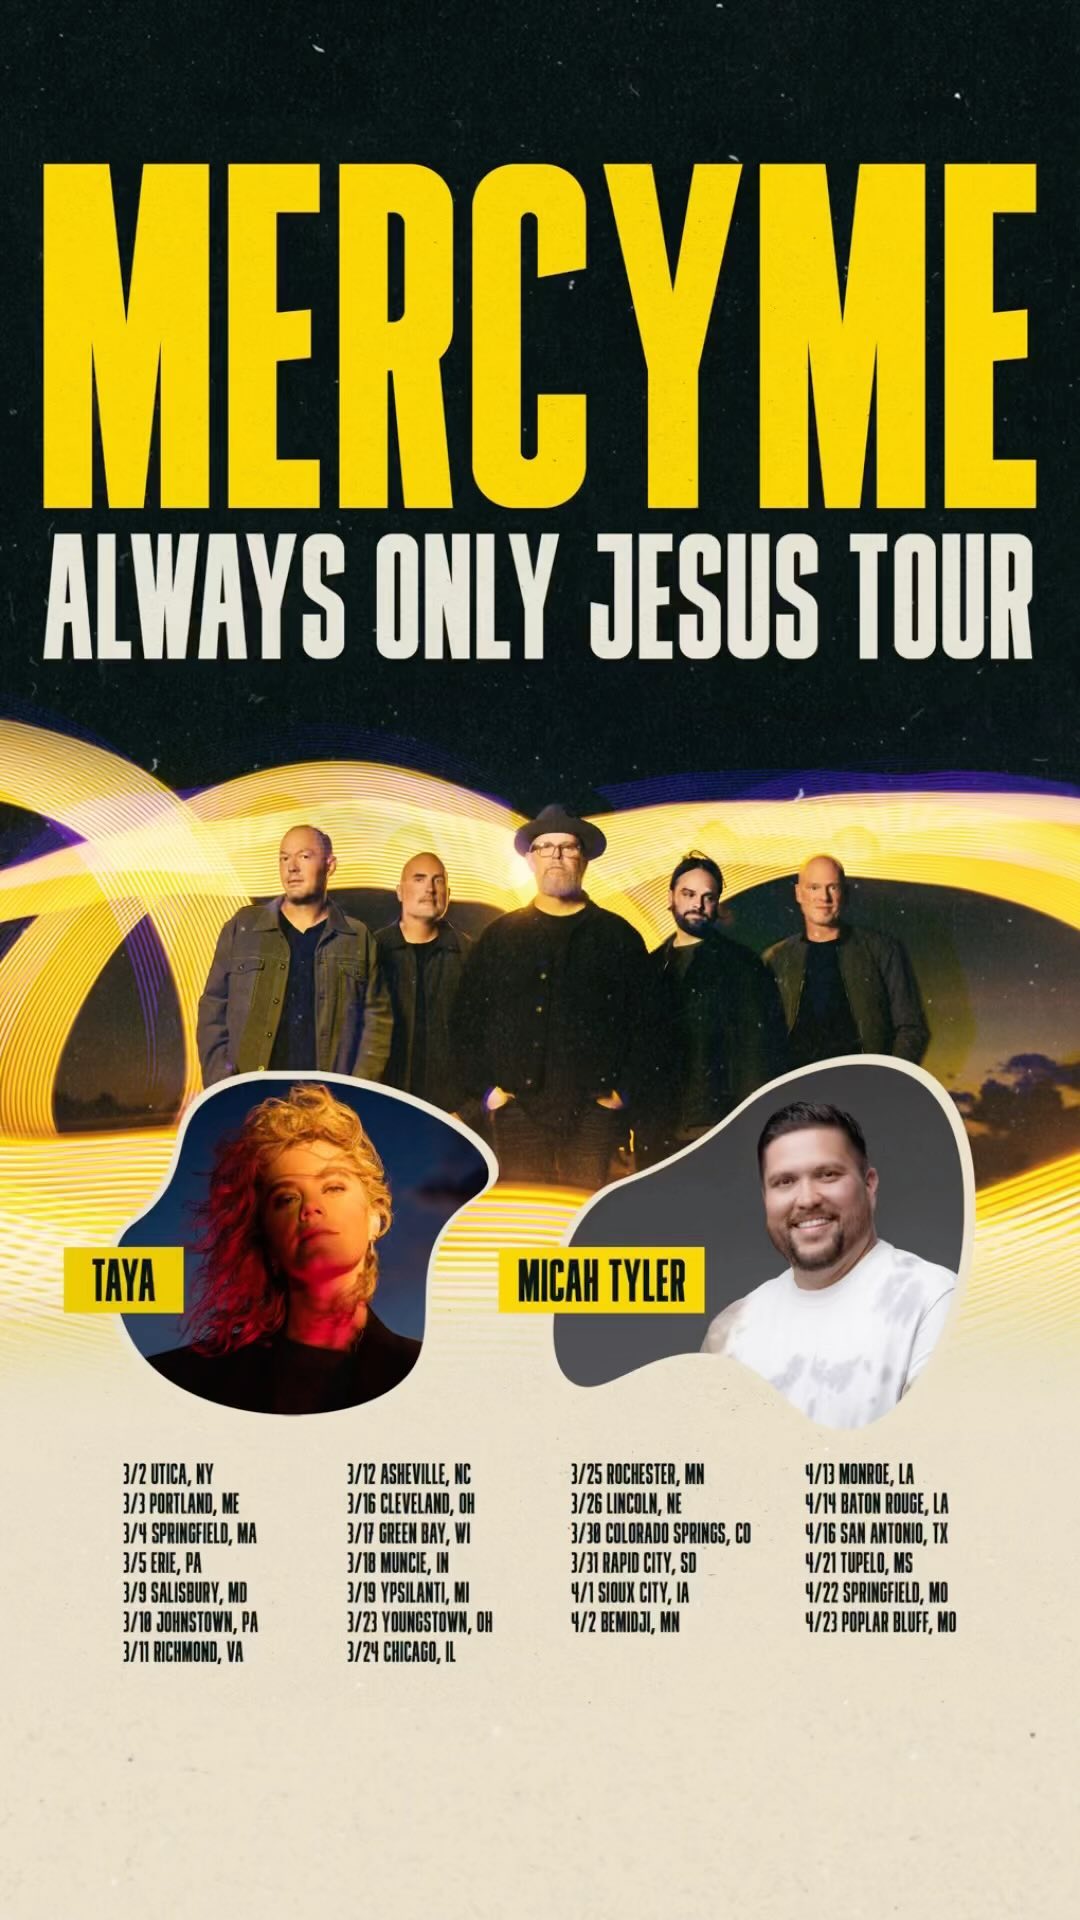 JUST ANNOUNCED: MercyMe Always Only Jesus Spring 2023 Tour, featuring Taya and Micah Tyler! We’re so excited to visit a city near you to worship with friends, old and new. Presales will begin Monday and Wednesday of next week depending on the market, so keep an eye on your socials!